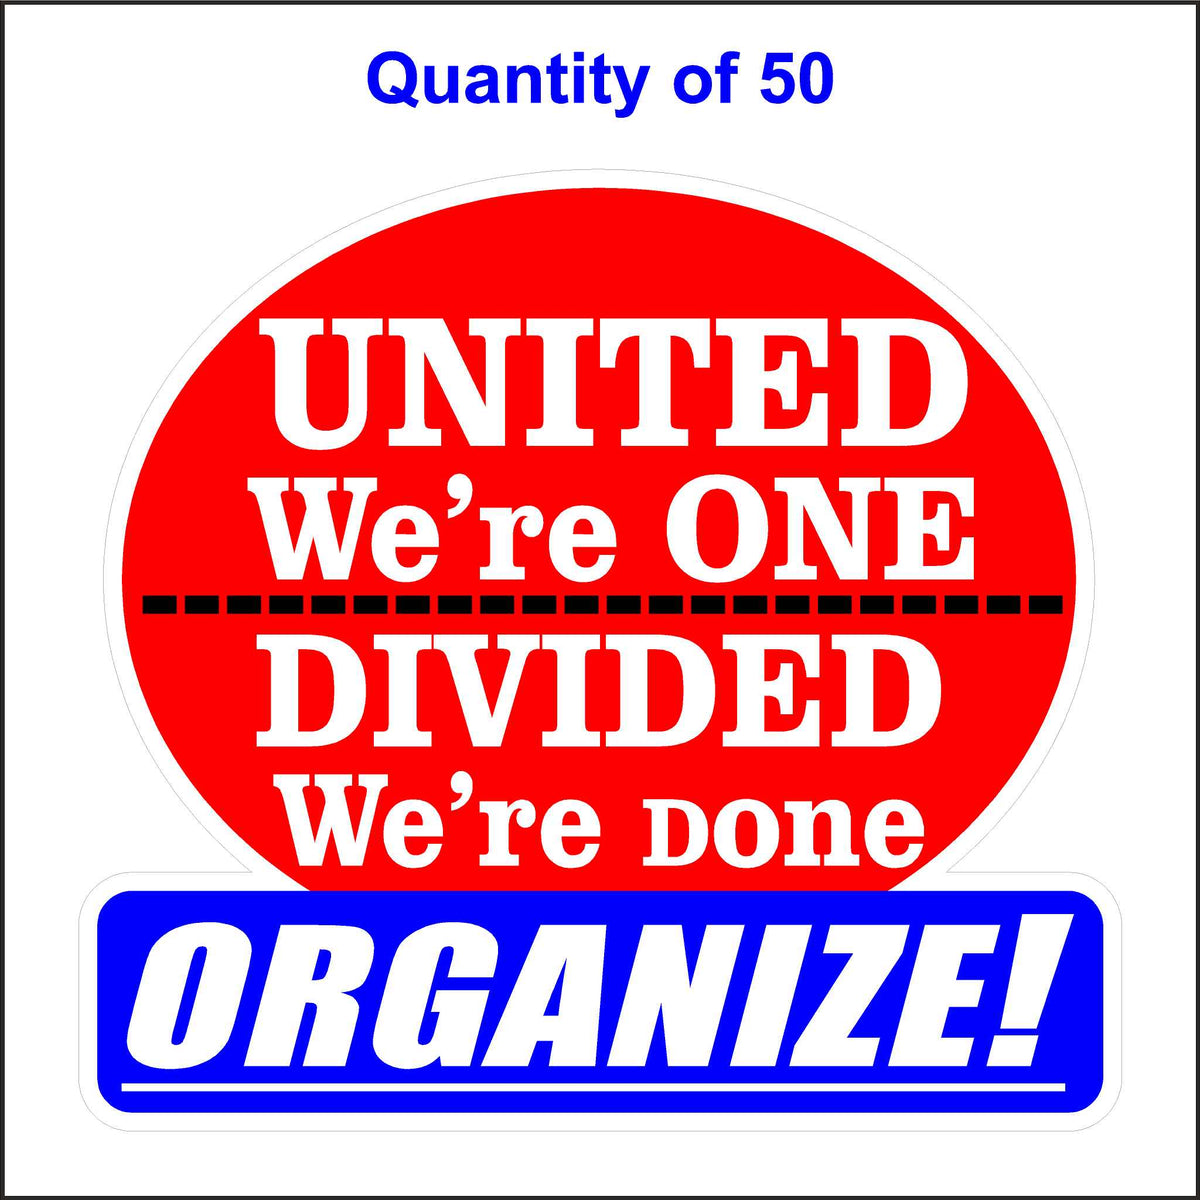 United We Are One Divided We Are Done Organize Stickers. 50 Quantity.